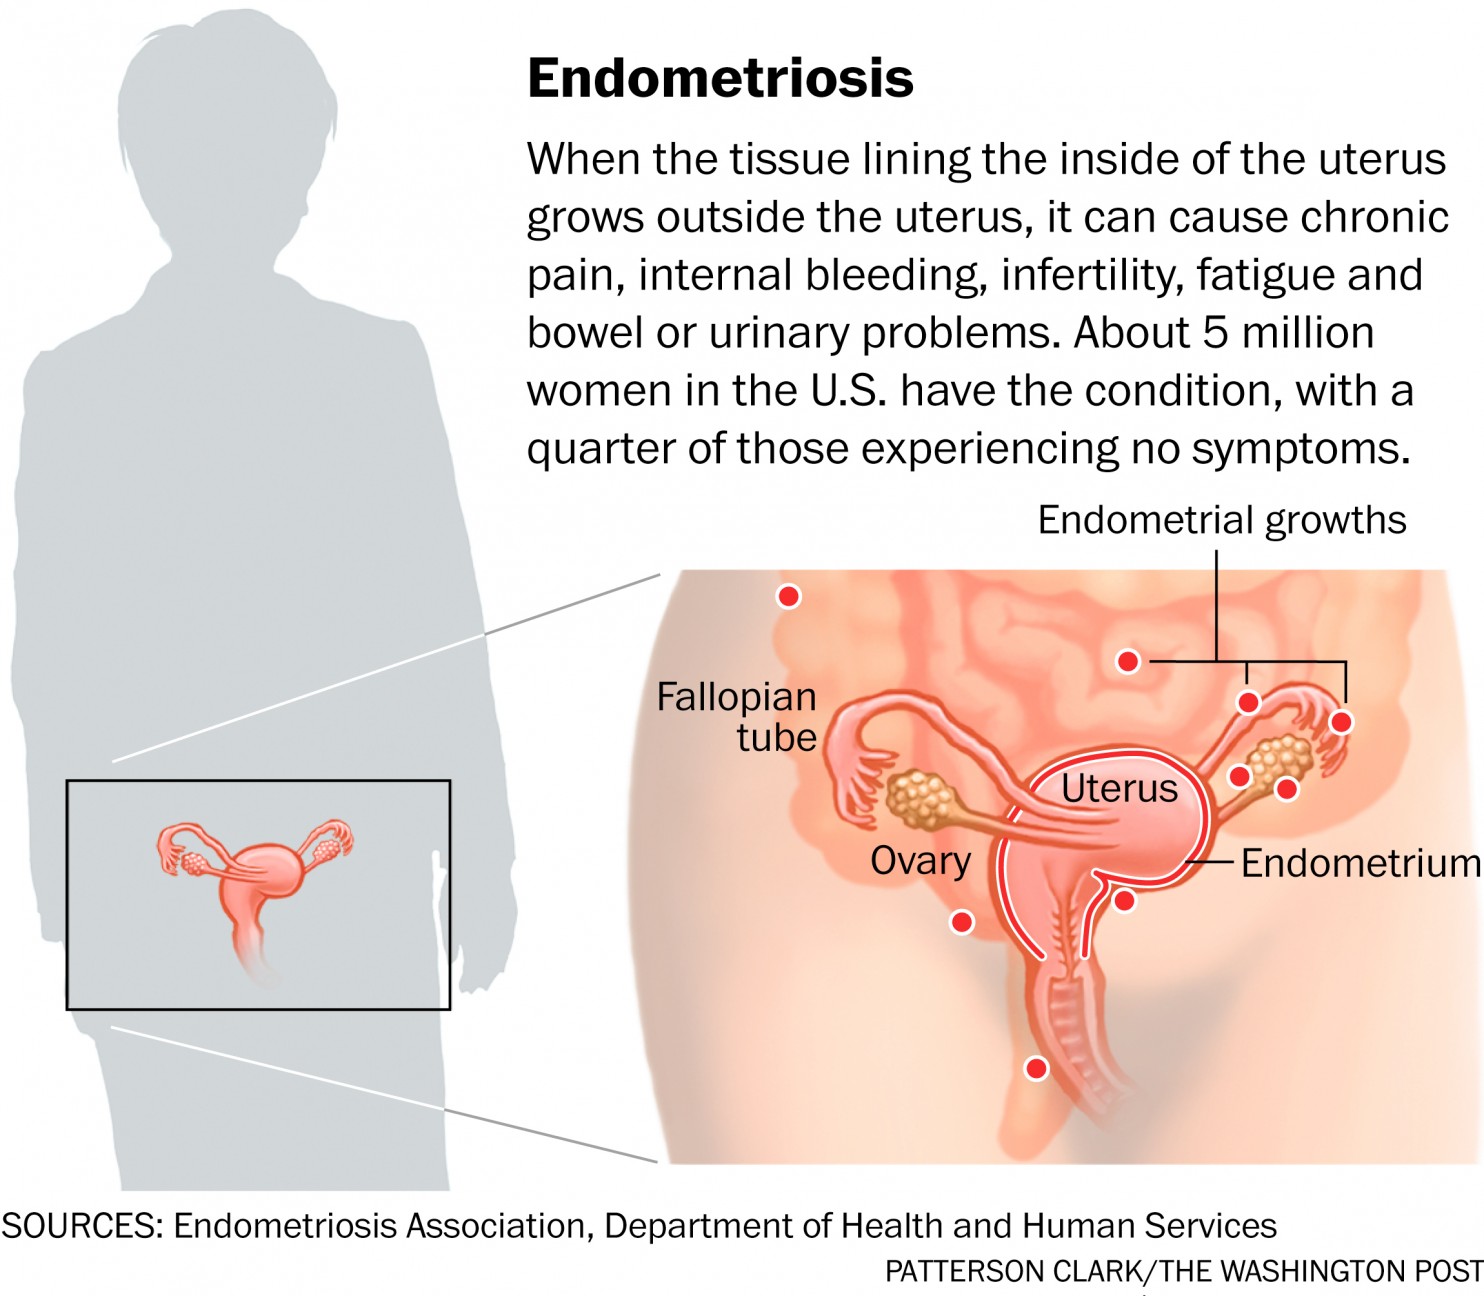 Photo from https://www.washingtonpost.com/national/health-science/for-women-with-endometriosis-answers-are-few/2015/05/04/c925edf2-c737-11e4-aa1a-86135599fb0f_story.html